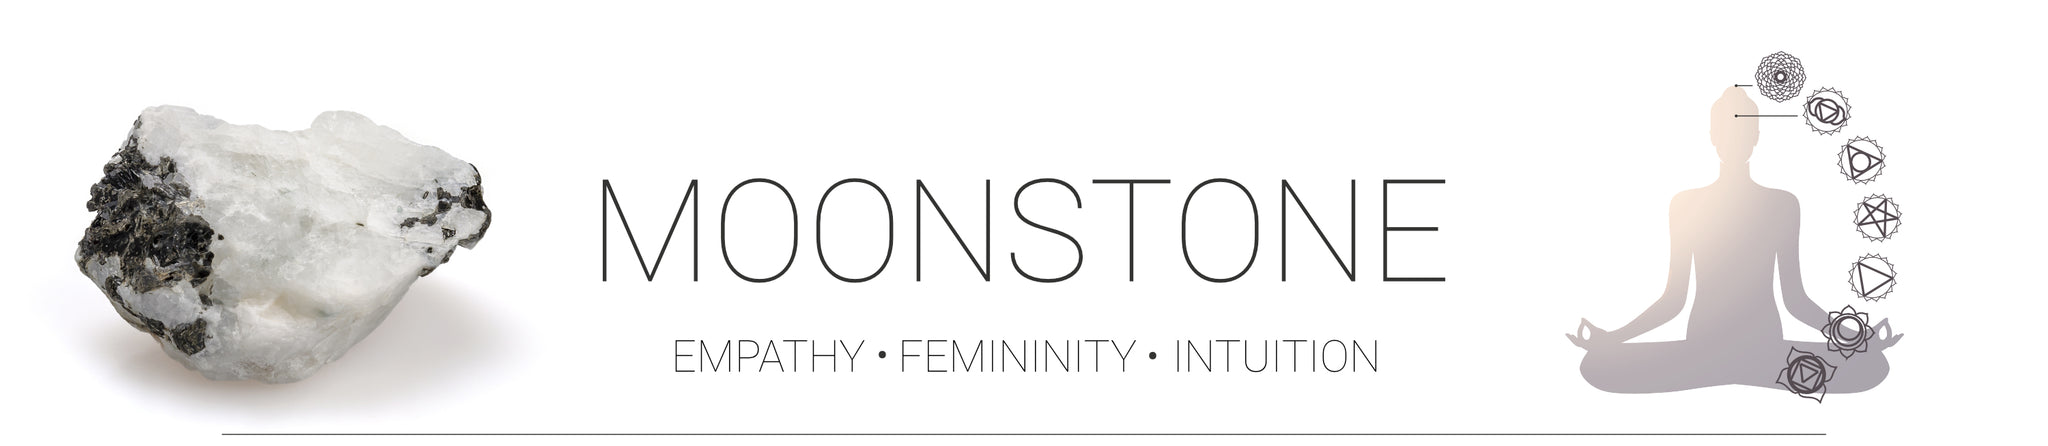 Moonstone gemstone at Embella for empathy, femininity and intuition